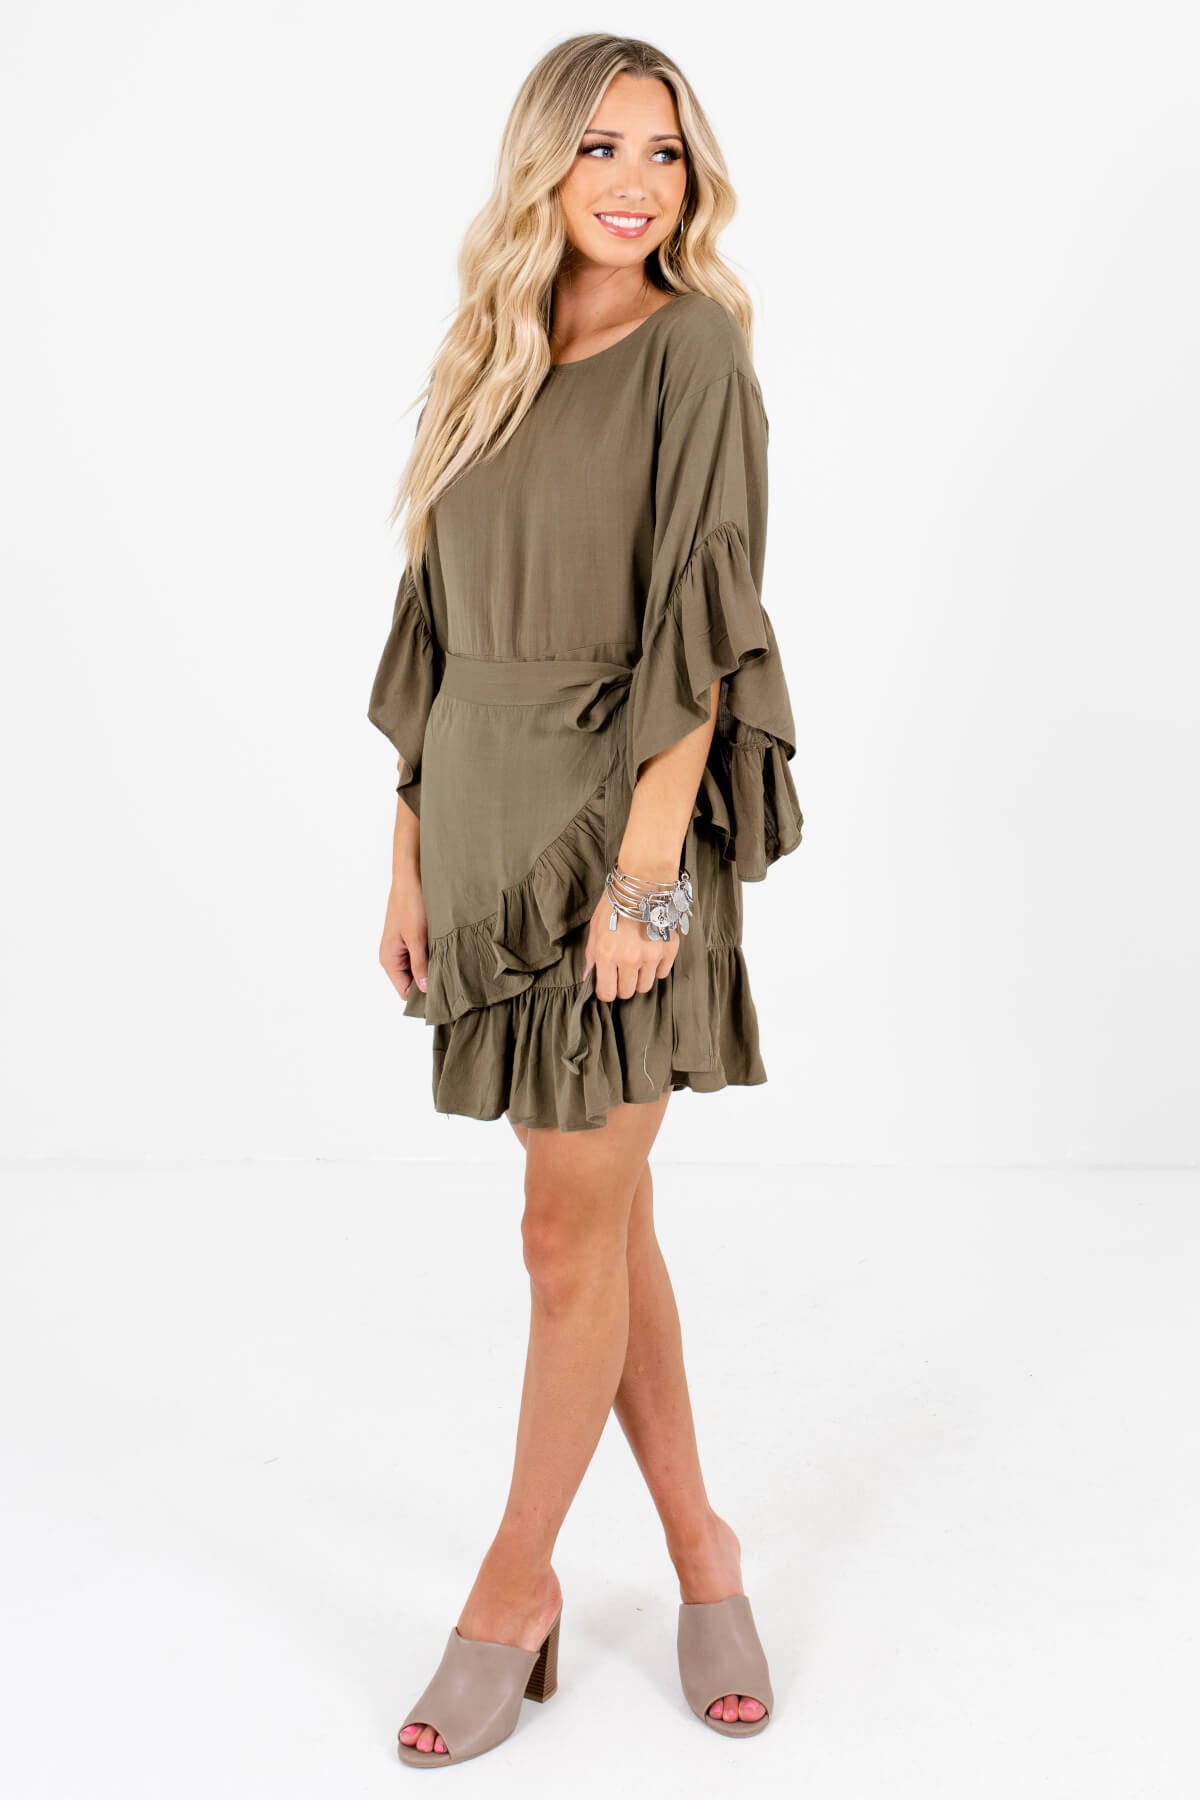 Olive Green Cute and Comfortable Boutique Mini Dresses for Women